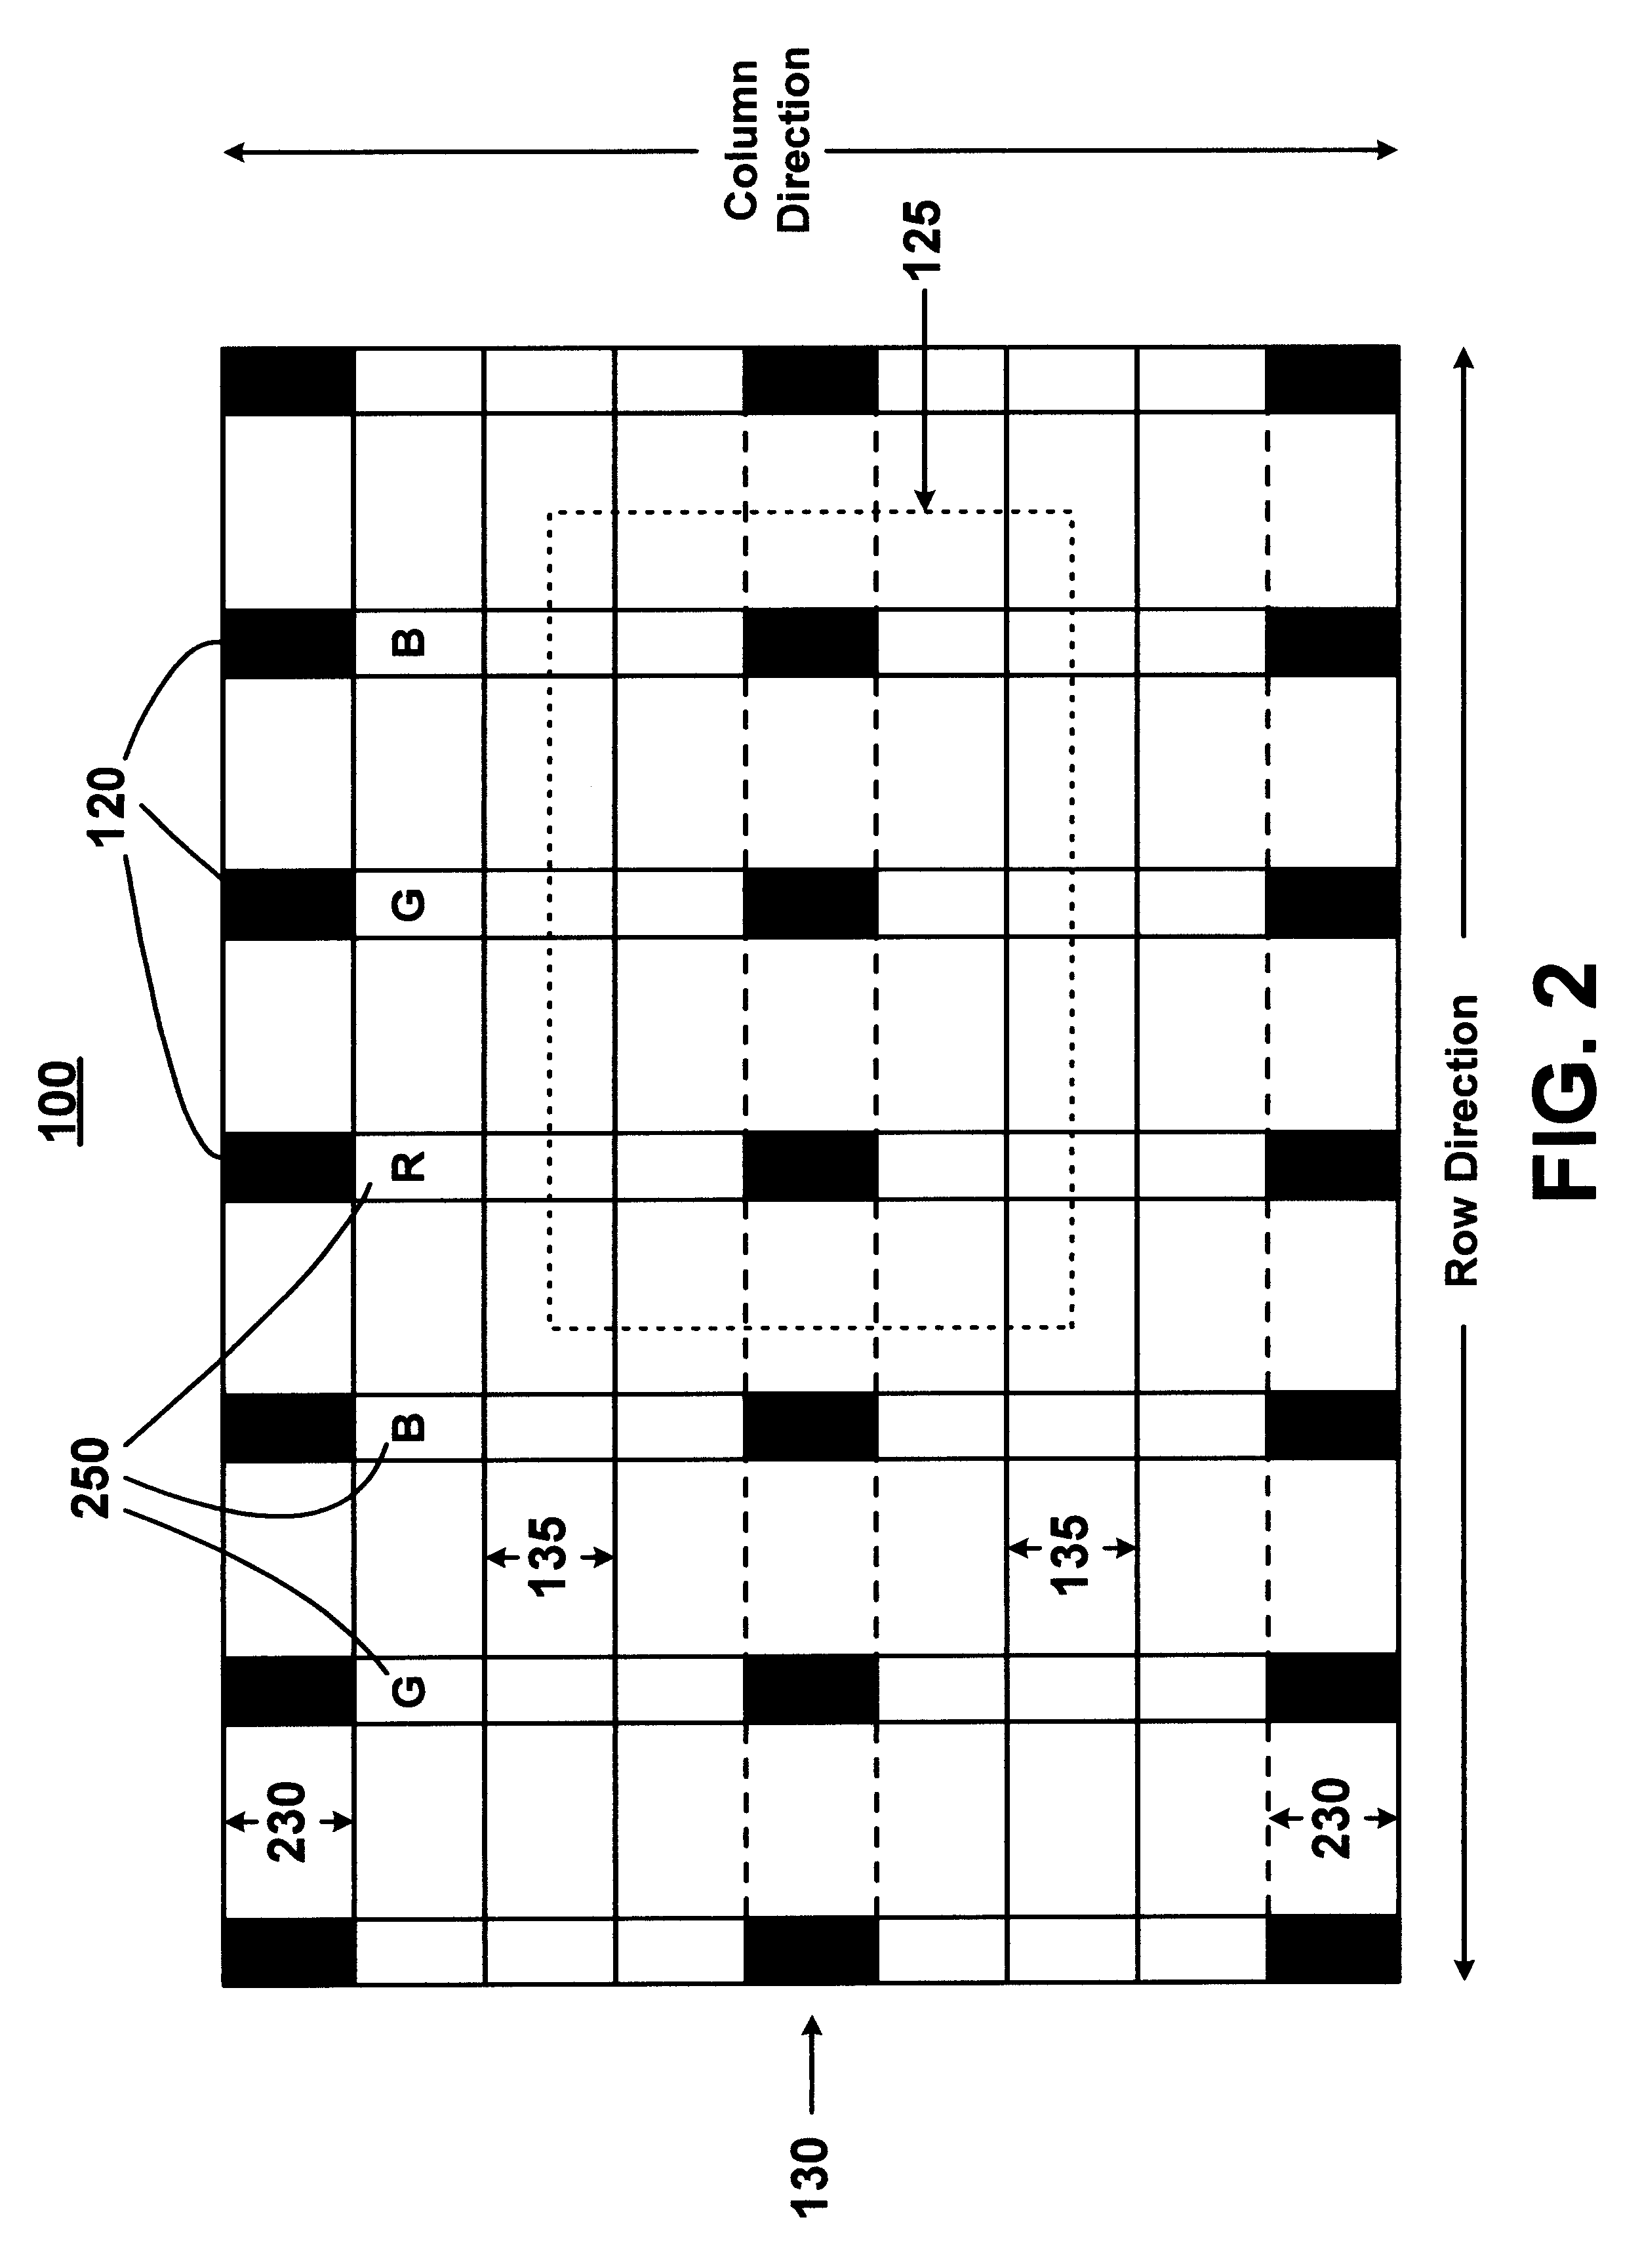 Procedures and apparatus for turning-on and turning-off elements within a field emission display device